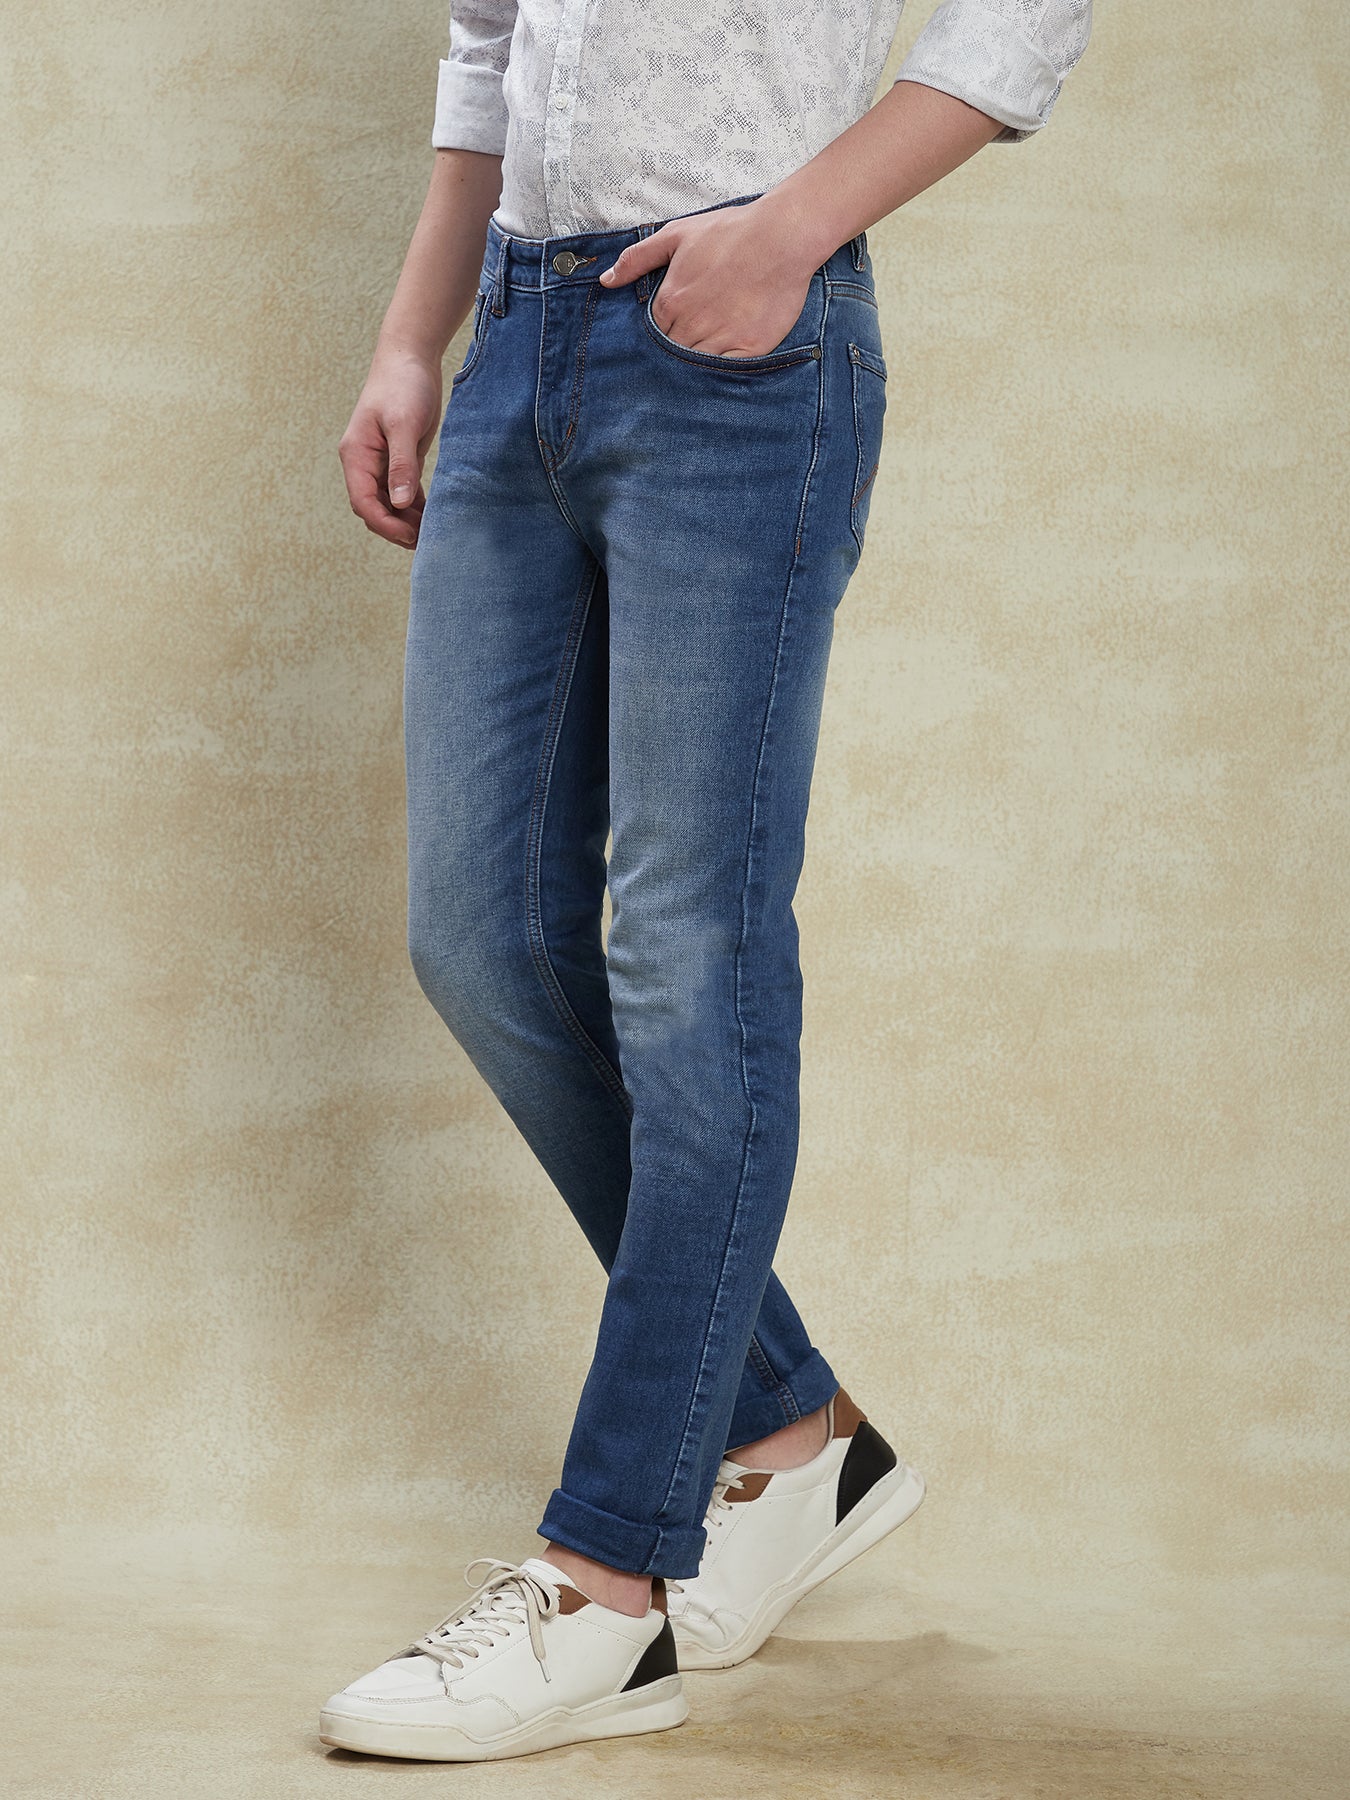 Cotton Stretch Dark Blue Plain Narrow Fit Flat Front Casual Jeans